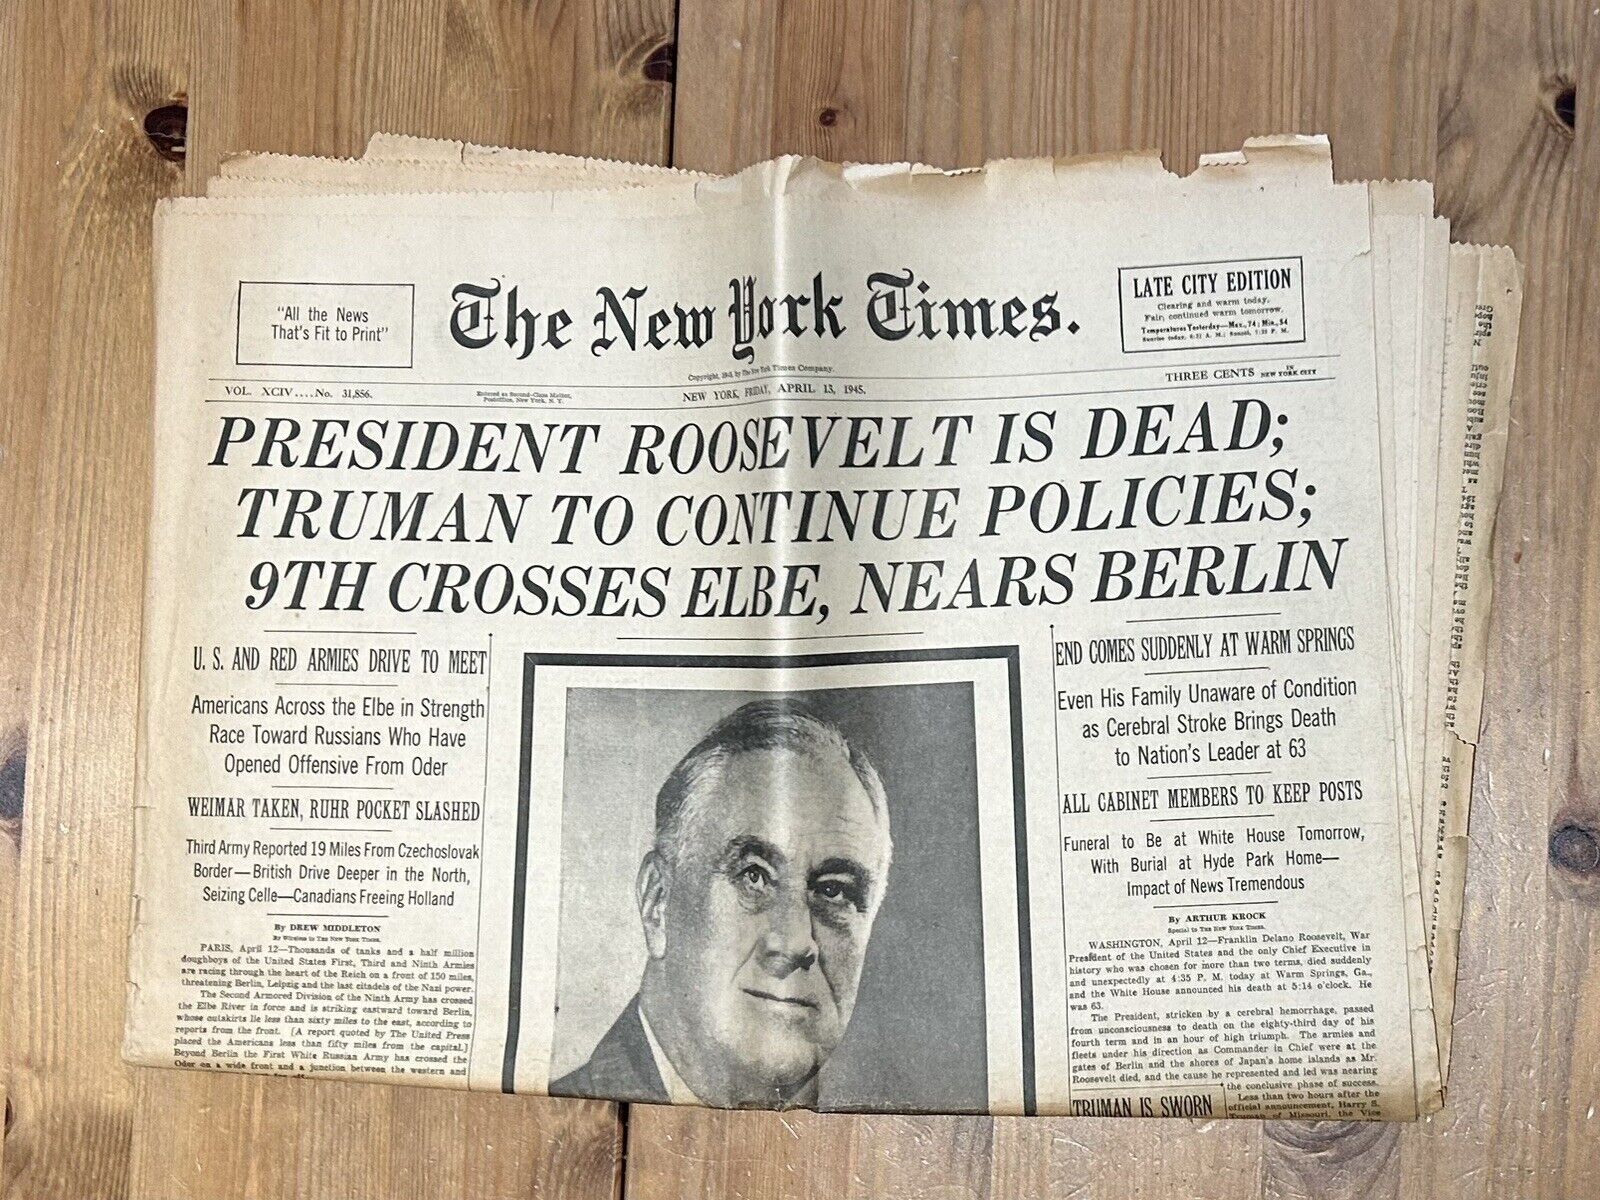 1945 APRIL 13 NEW YORK TIMES - PRESIDENT ROOSEVELT IS DEAD - NP 6467